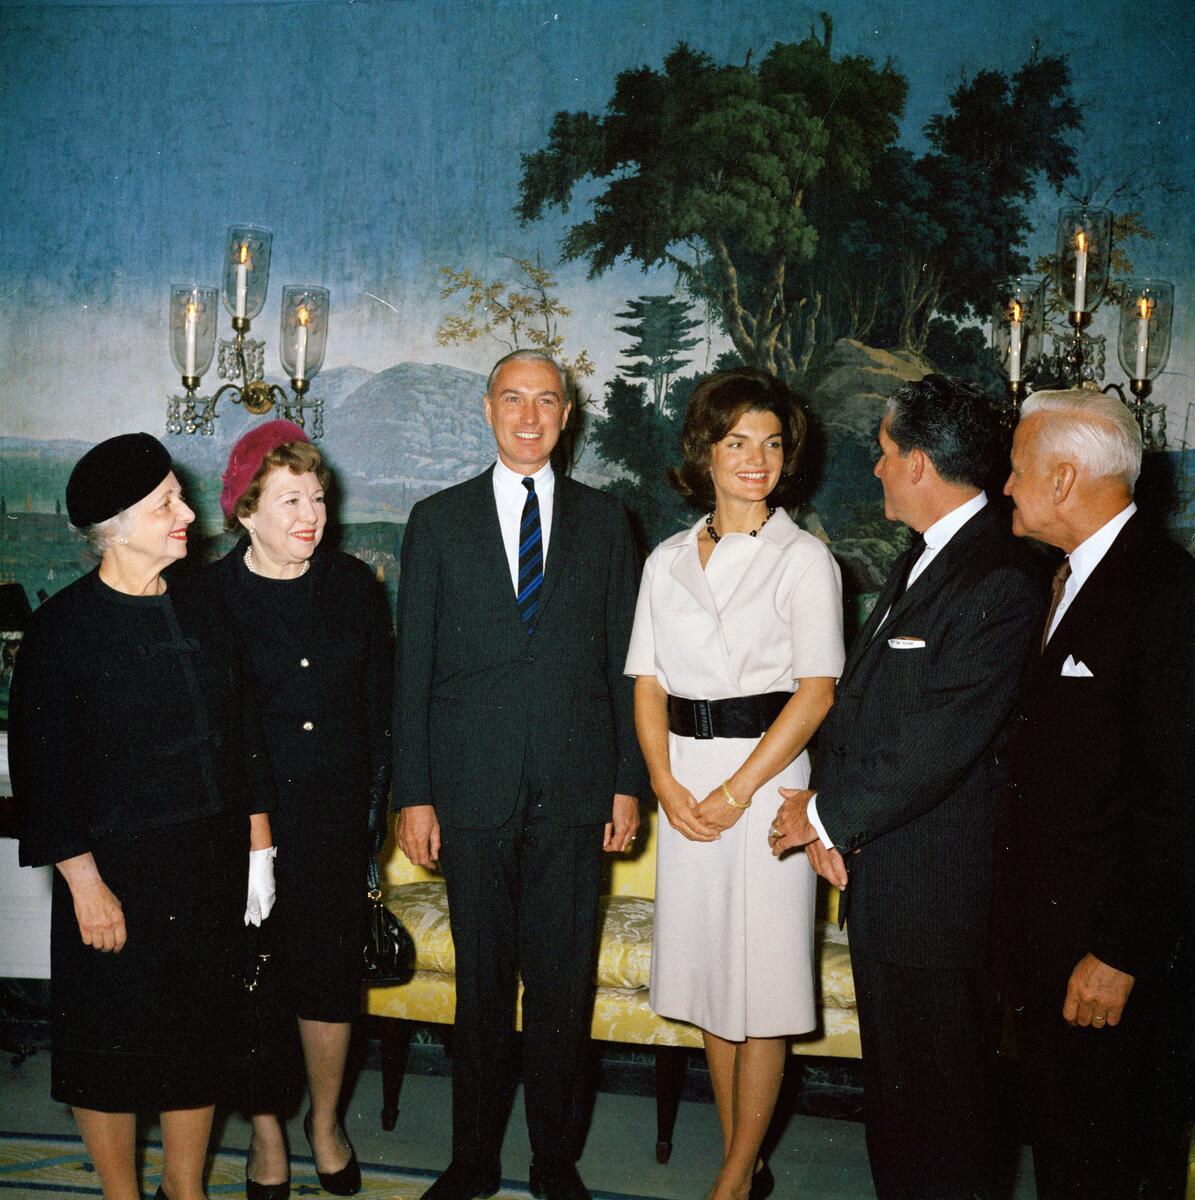 When she became first lady, Jacqueline Kennedy knew she wanted to take on a restoration of the White House, to show the evolving history of the people who had lived and worked there. Learn more: jfklibrary.org/learn/about-jf… #MoreThanFirstLadies #WomensHistoryMonth